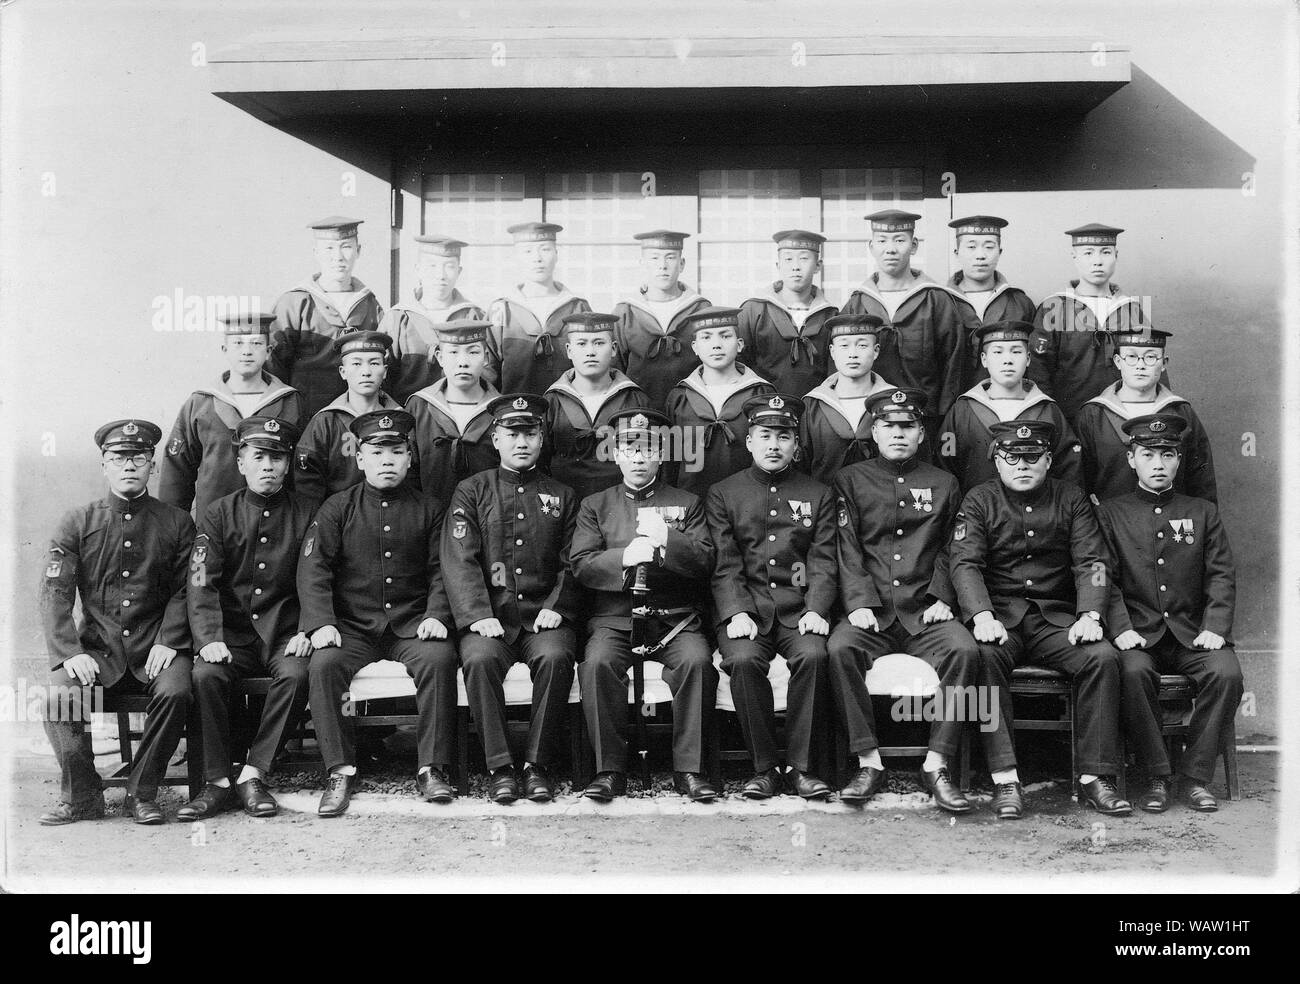 [ 1920s Japan - Japanese Navy Cadets ] —   Uniformed cadets and officers of the Imperial Japanese Navy in Yokosuka, Kanagawa.  Based on the insignia, this was photographed in November 1942 at the earliest.  20th century vintage gelatin silver print. Stock Photo